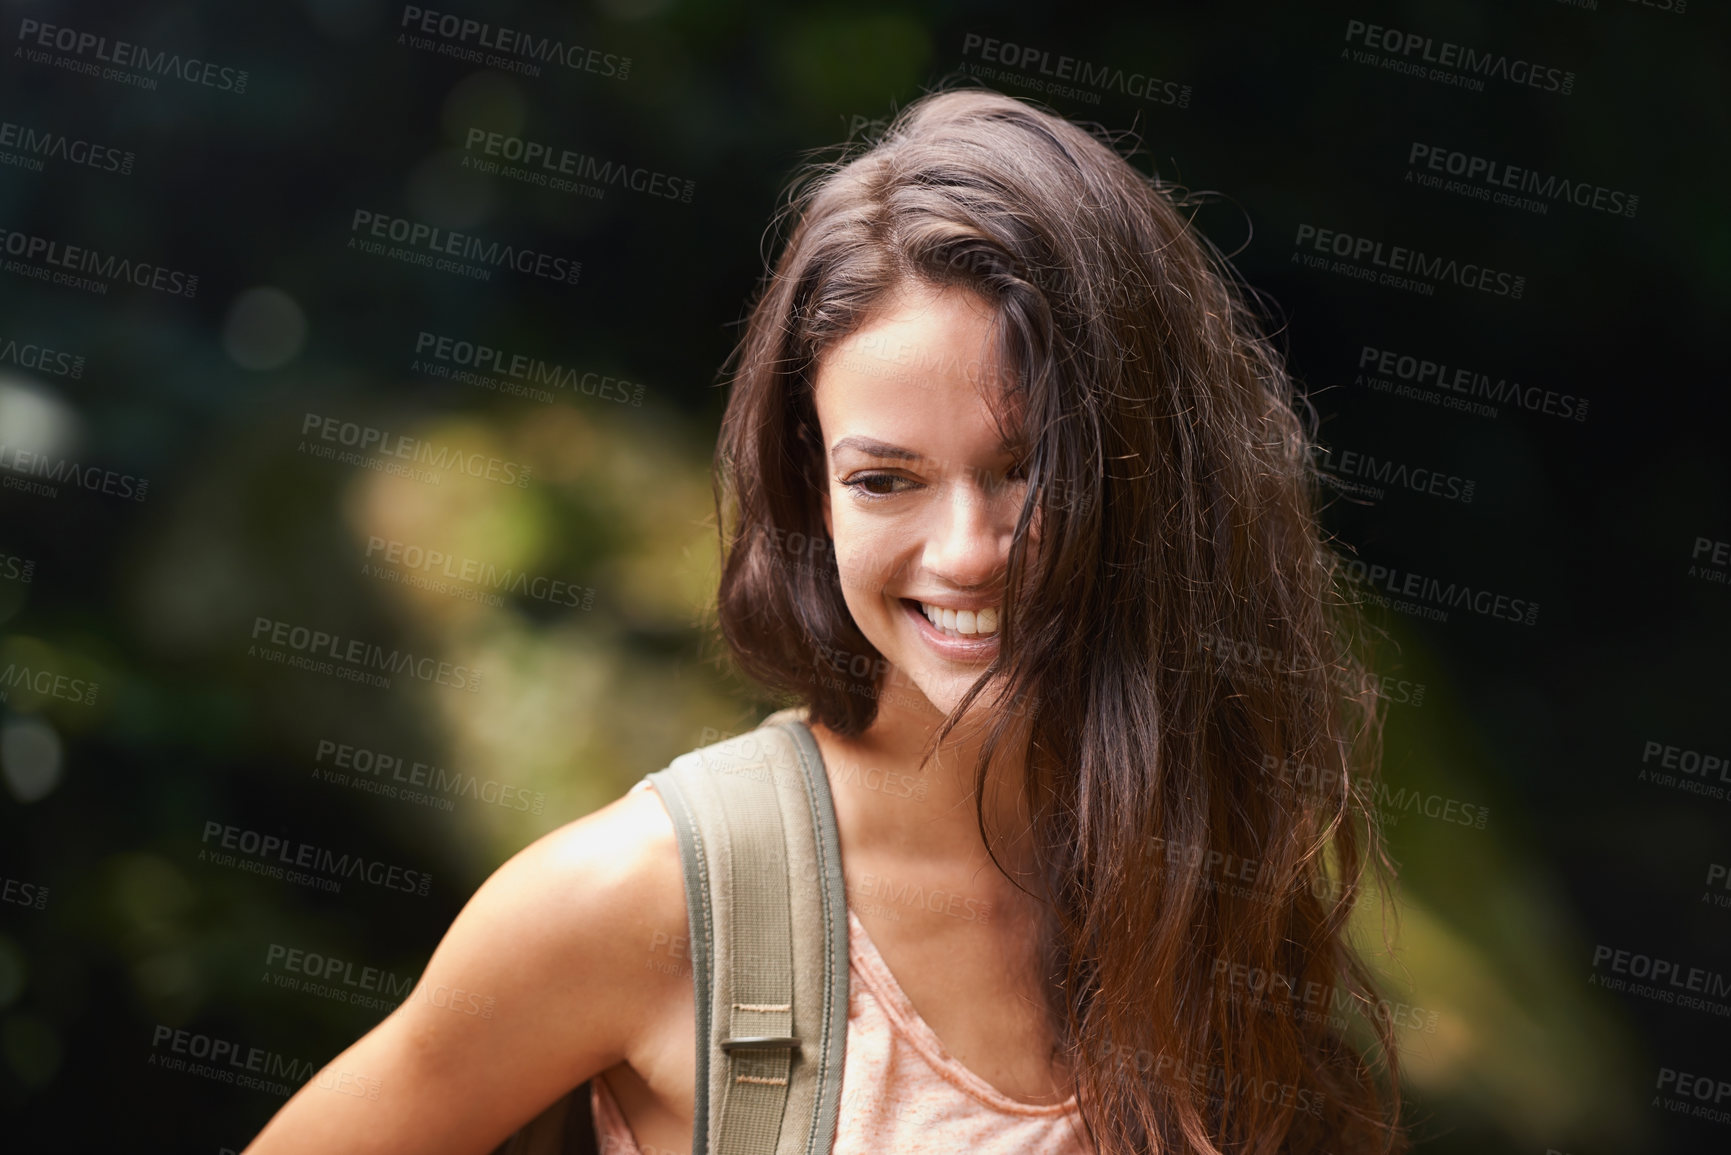 Buy stock photo Hiking, backpack or happy woman in nature, woods or wilderness for trekking or outdoor adventure with bag. Smile, relax or hiker walking in natural park or forest for exercise or wellness on holiday